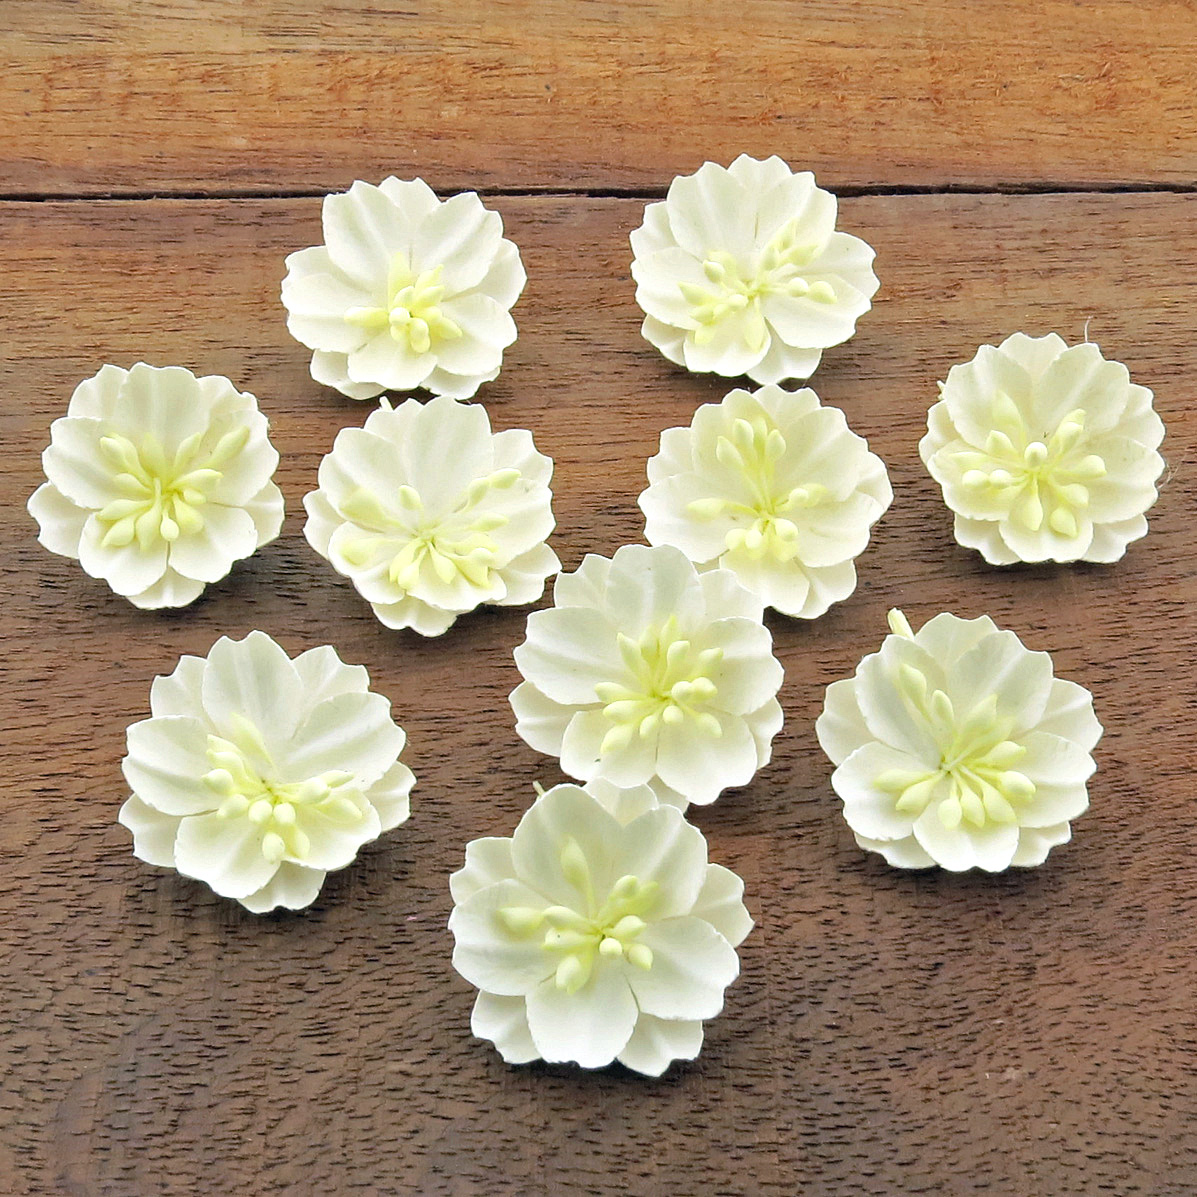 WHITE COTTON STEM MULBERRY PAPER FLOWERS - SET A - Click Image to Close